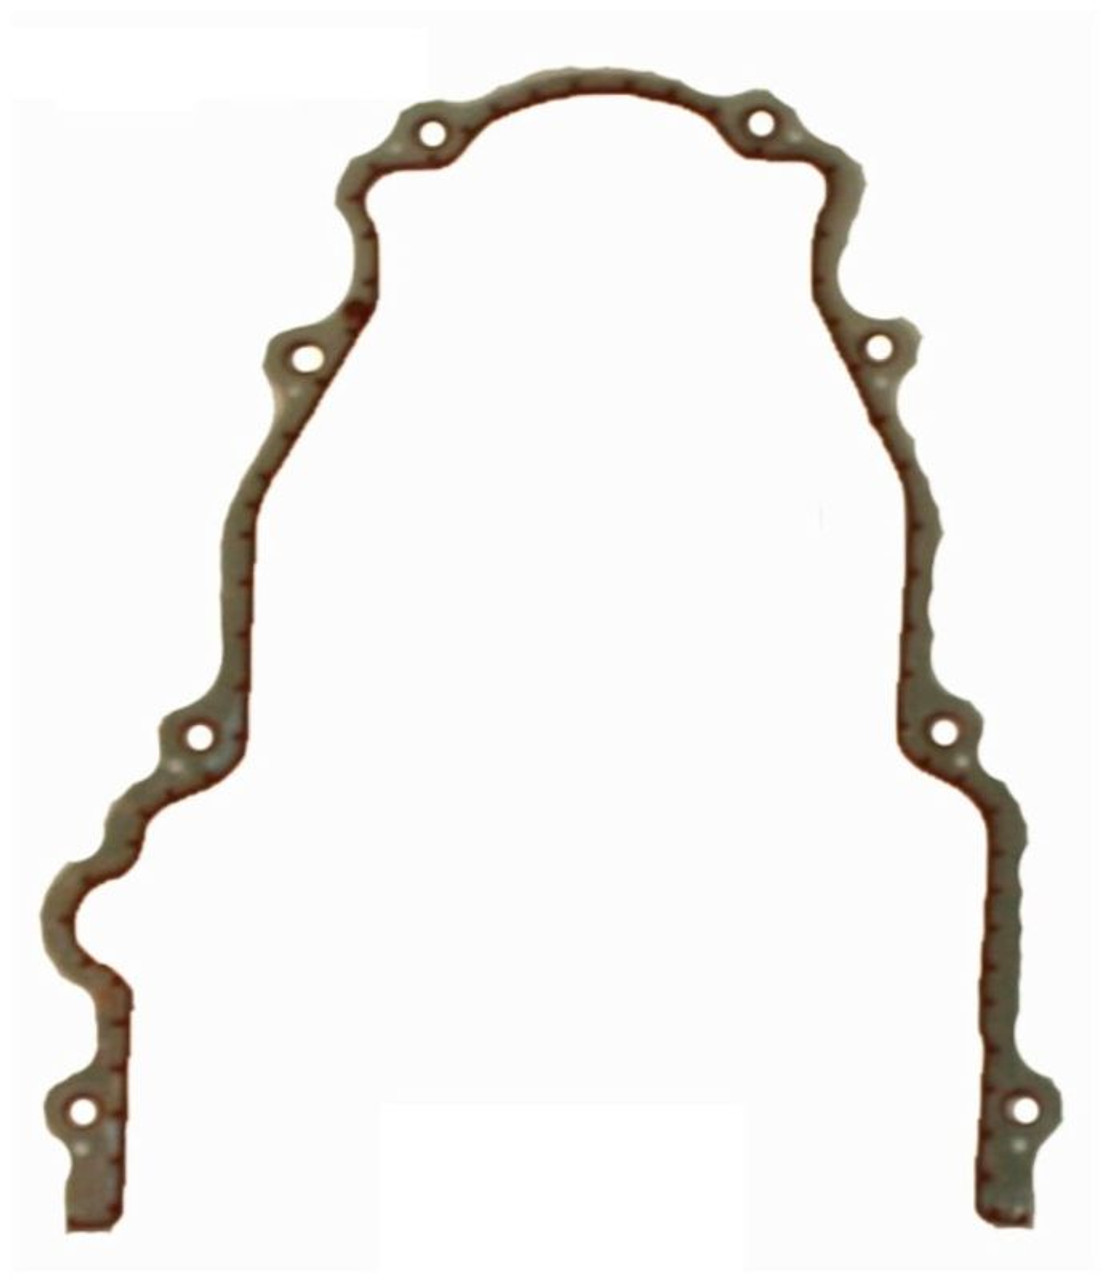 2000 Chevrolet Camaro 5.7L Engine Timing Cover Gasket TCG293-A -15